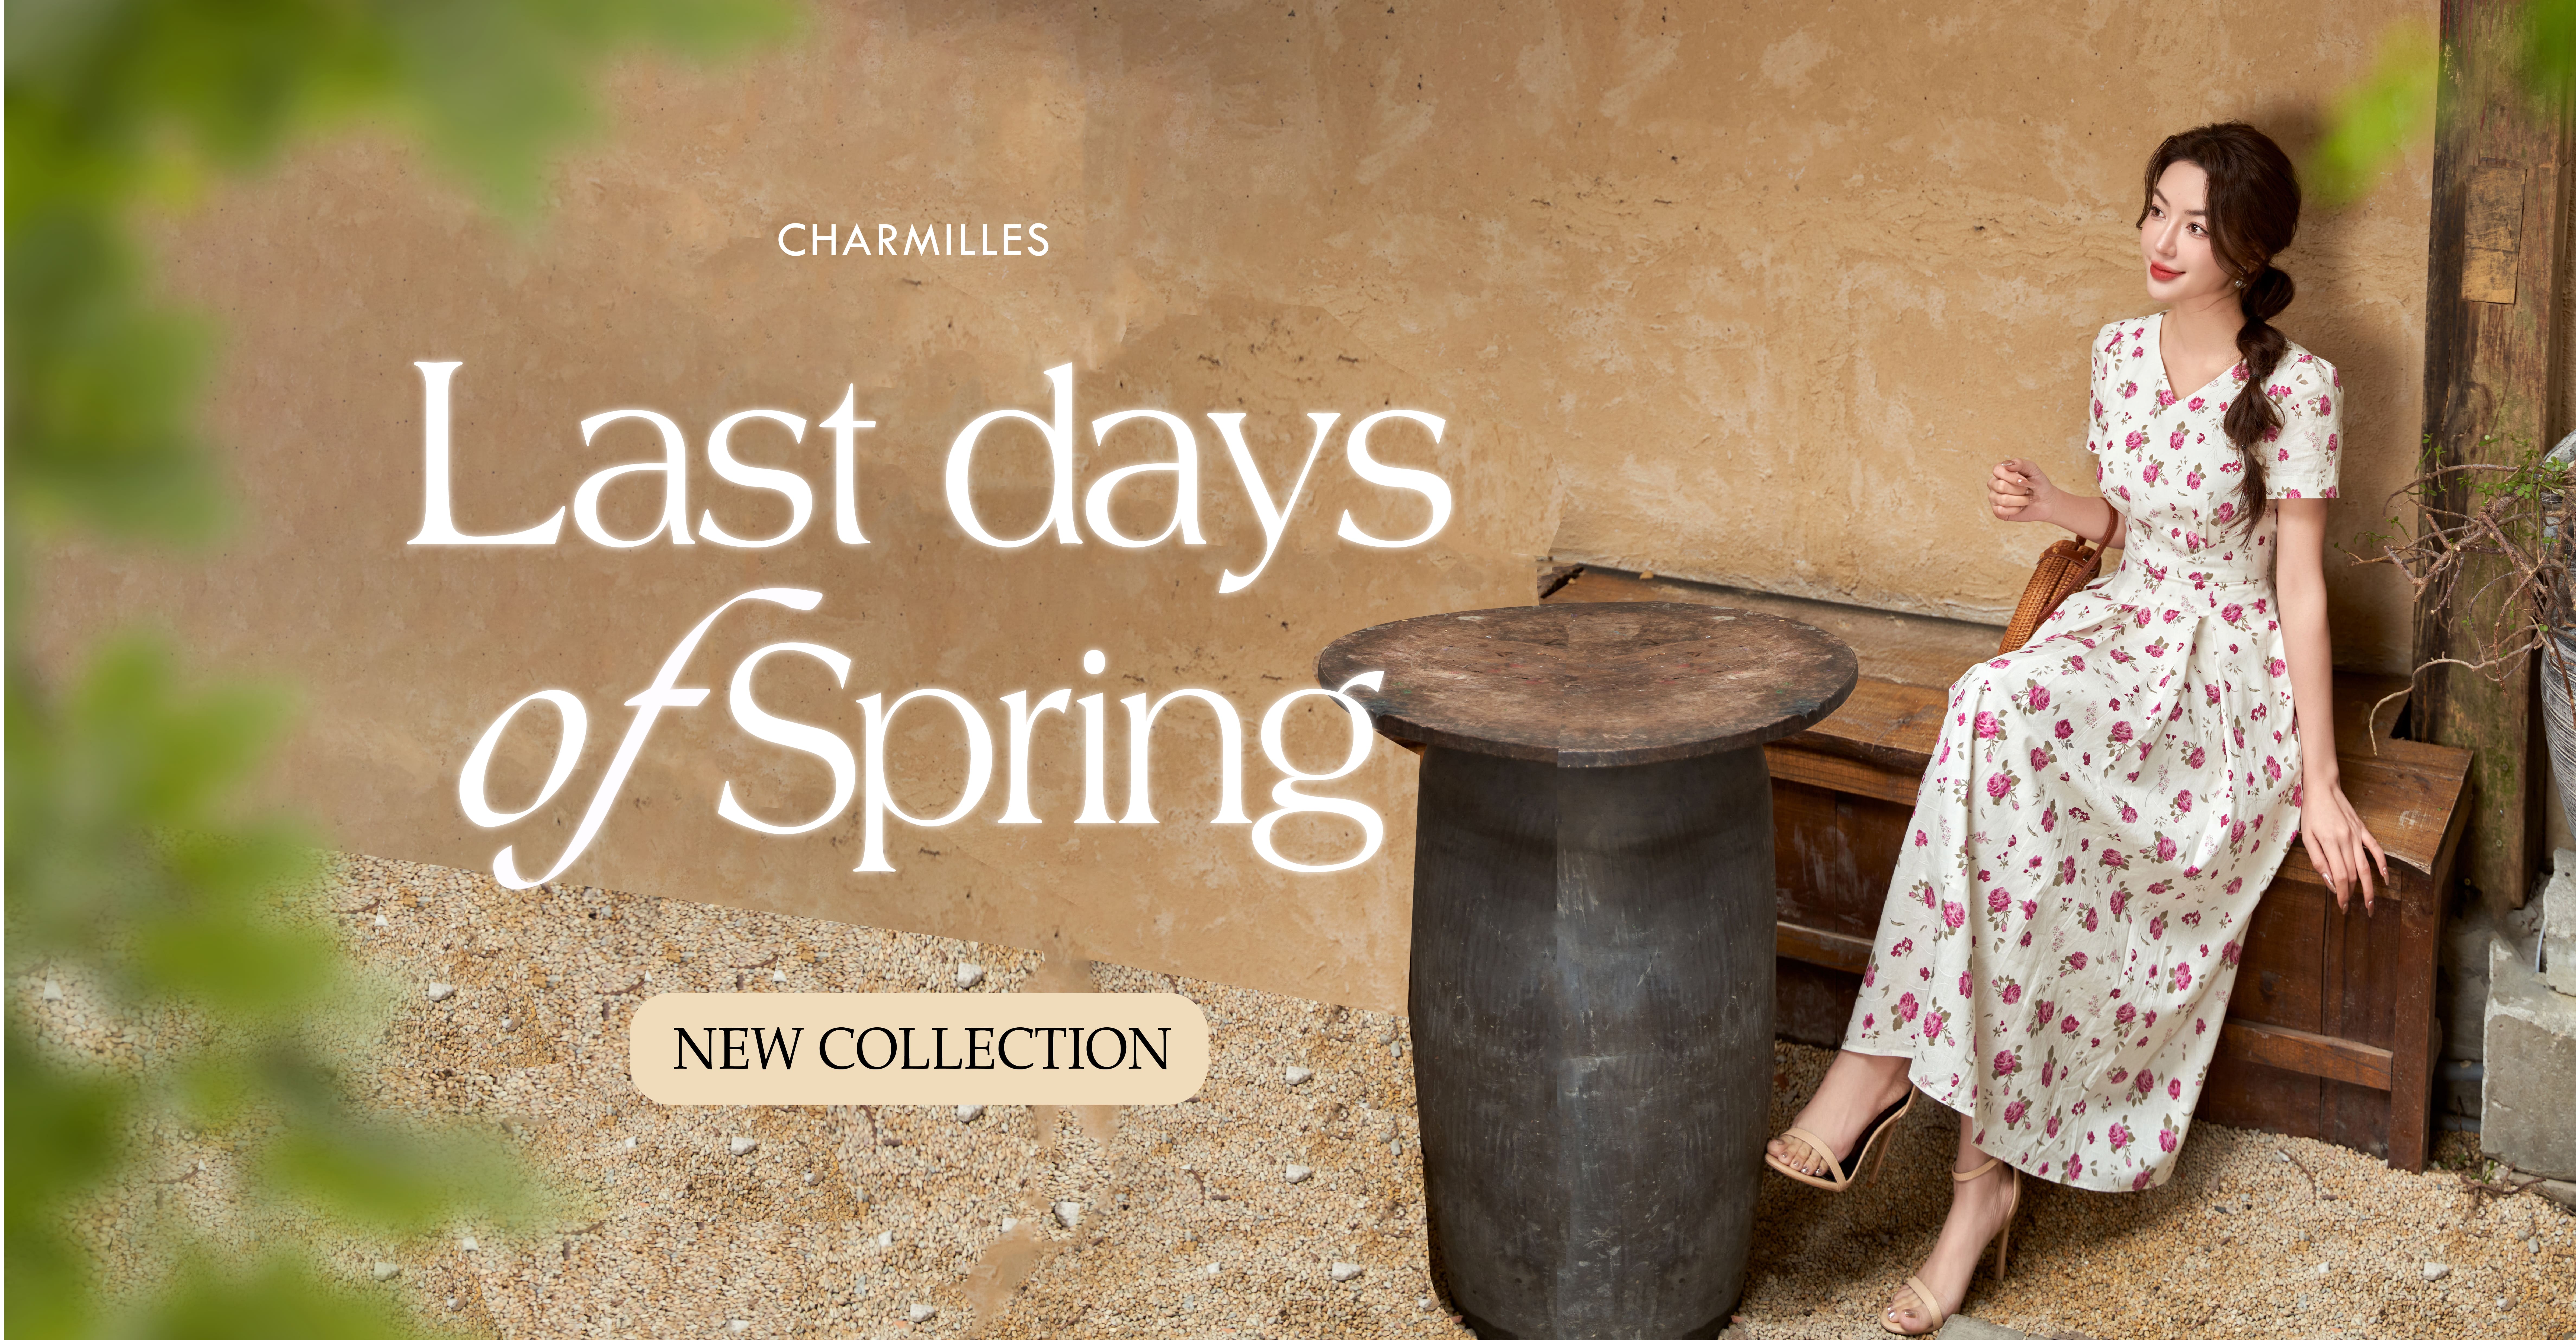 NEW COLLECTION - LAST DAYS OF SPRING